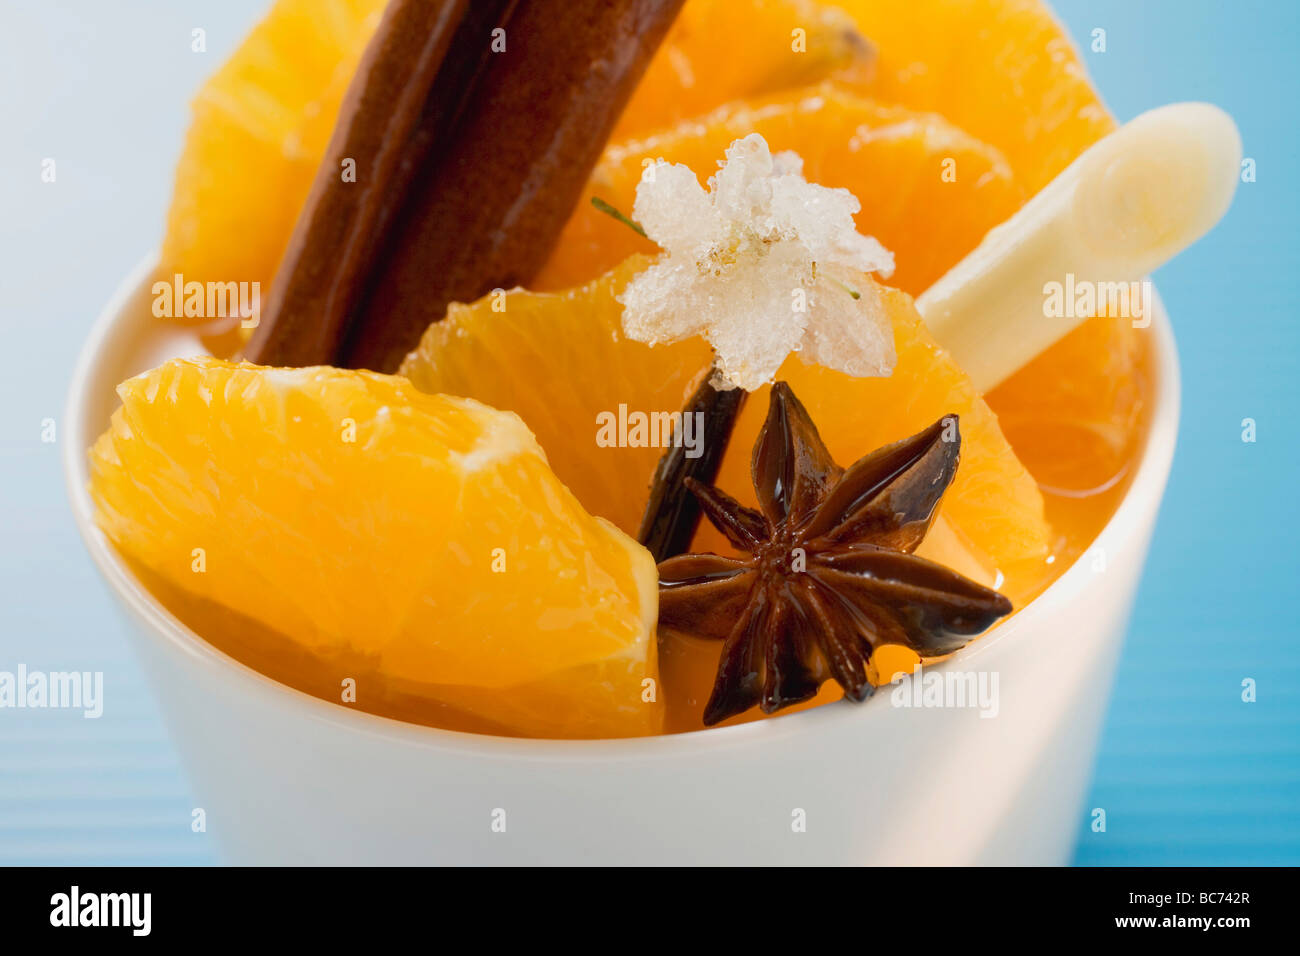 Orange slices with star anise, lemon grass & sugared flower - Stock Photo